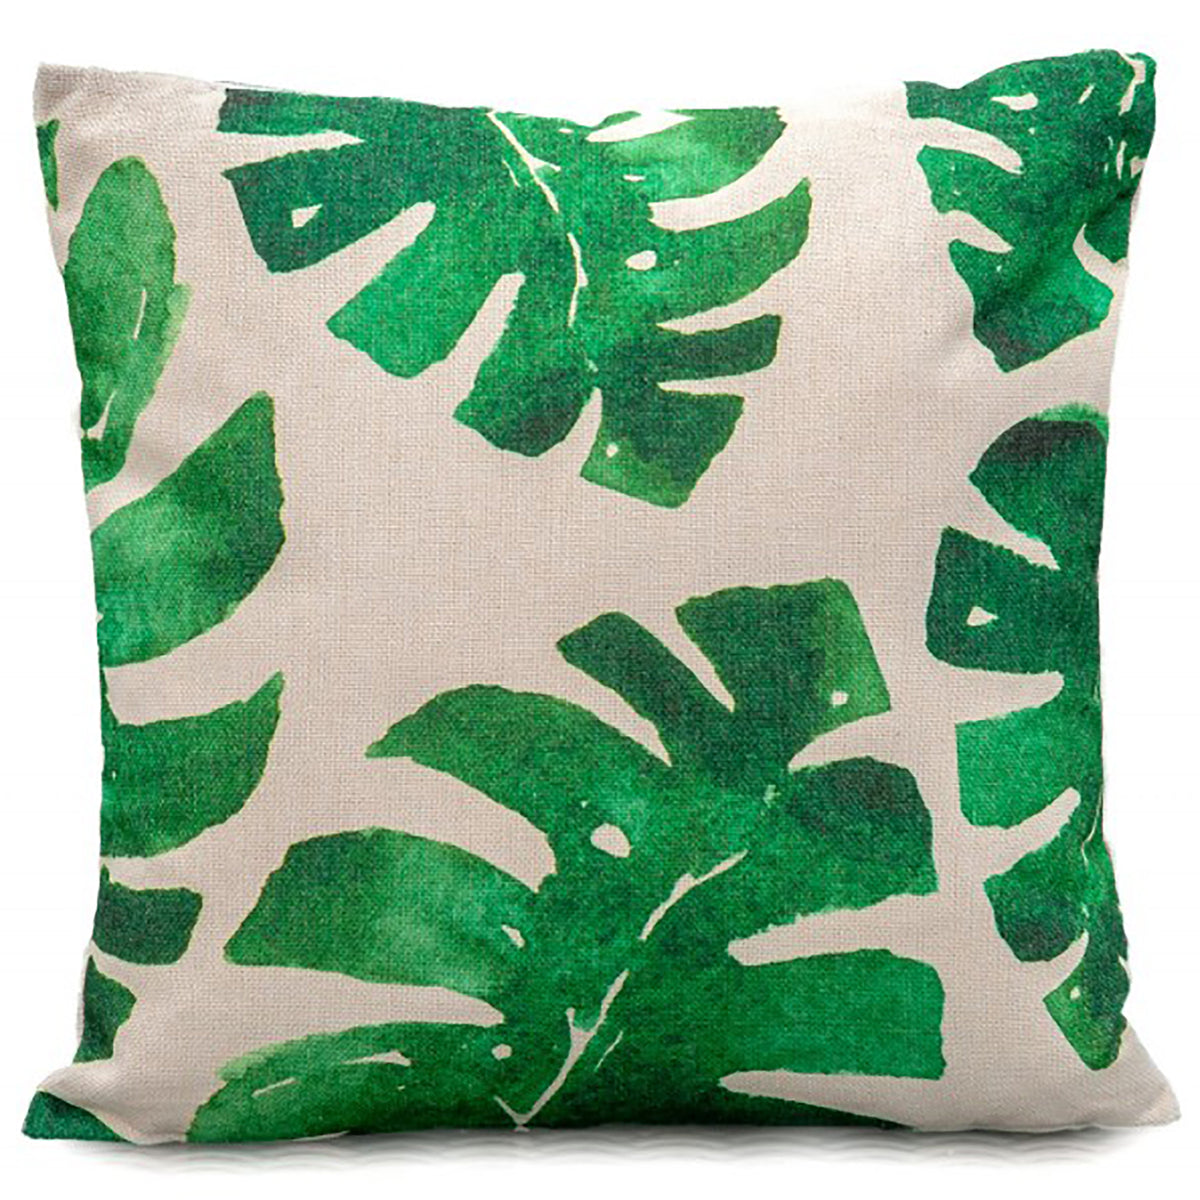 LG Outdoor Banana Leaves Scatter Cushion